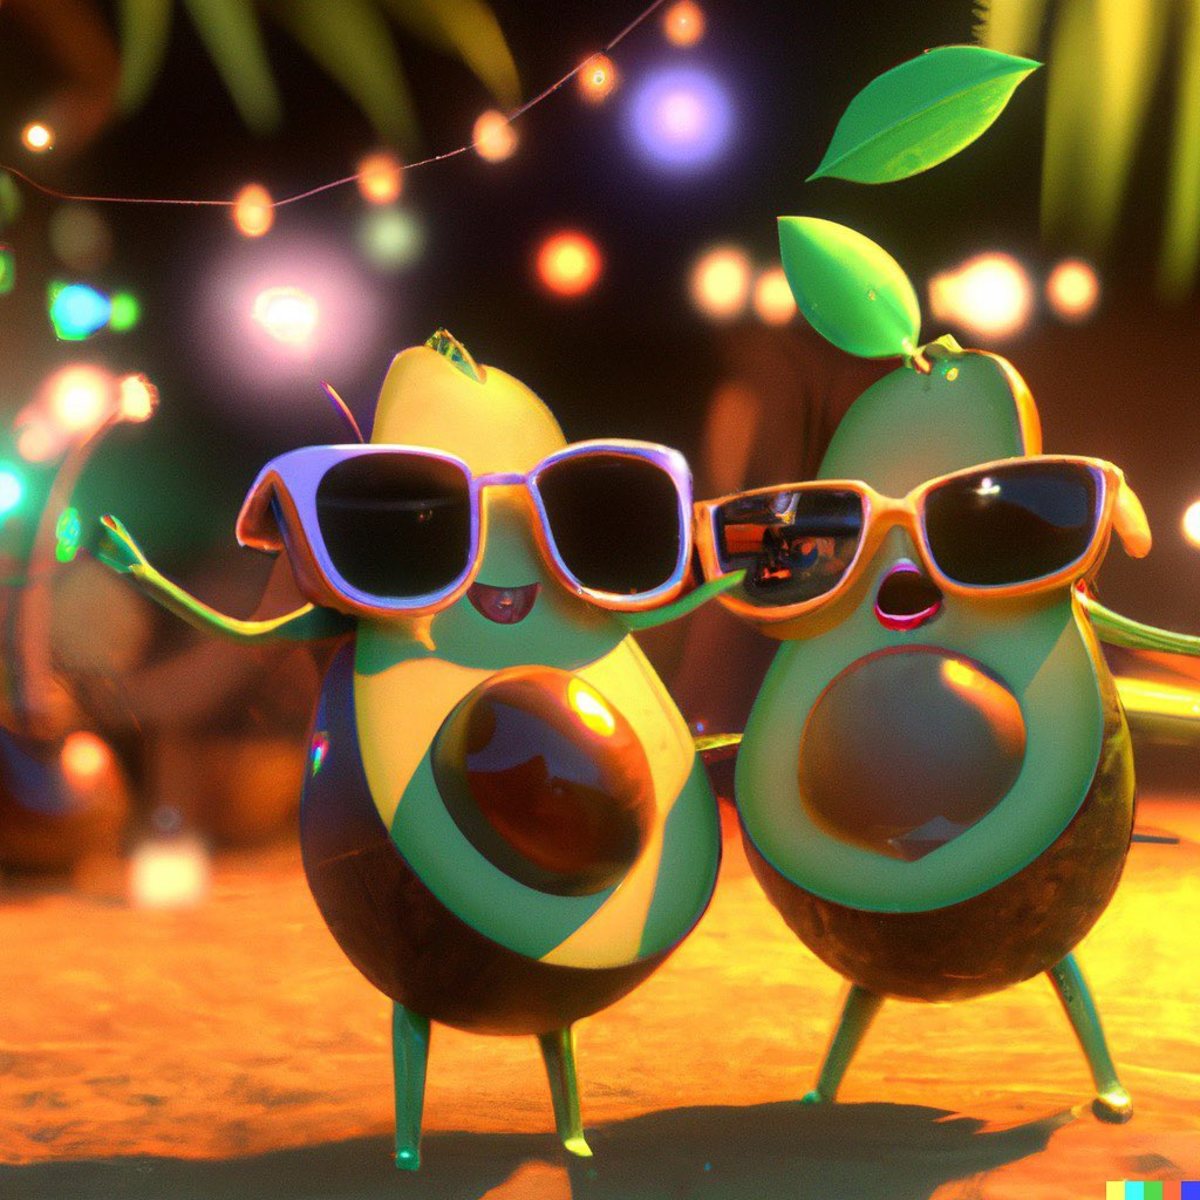 Avocados dancing, drinking, singing and partying at a Hawaiian luau (Actual text prompt used)